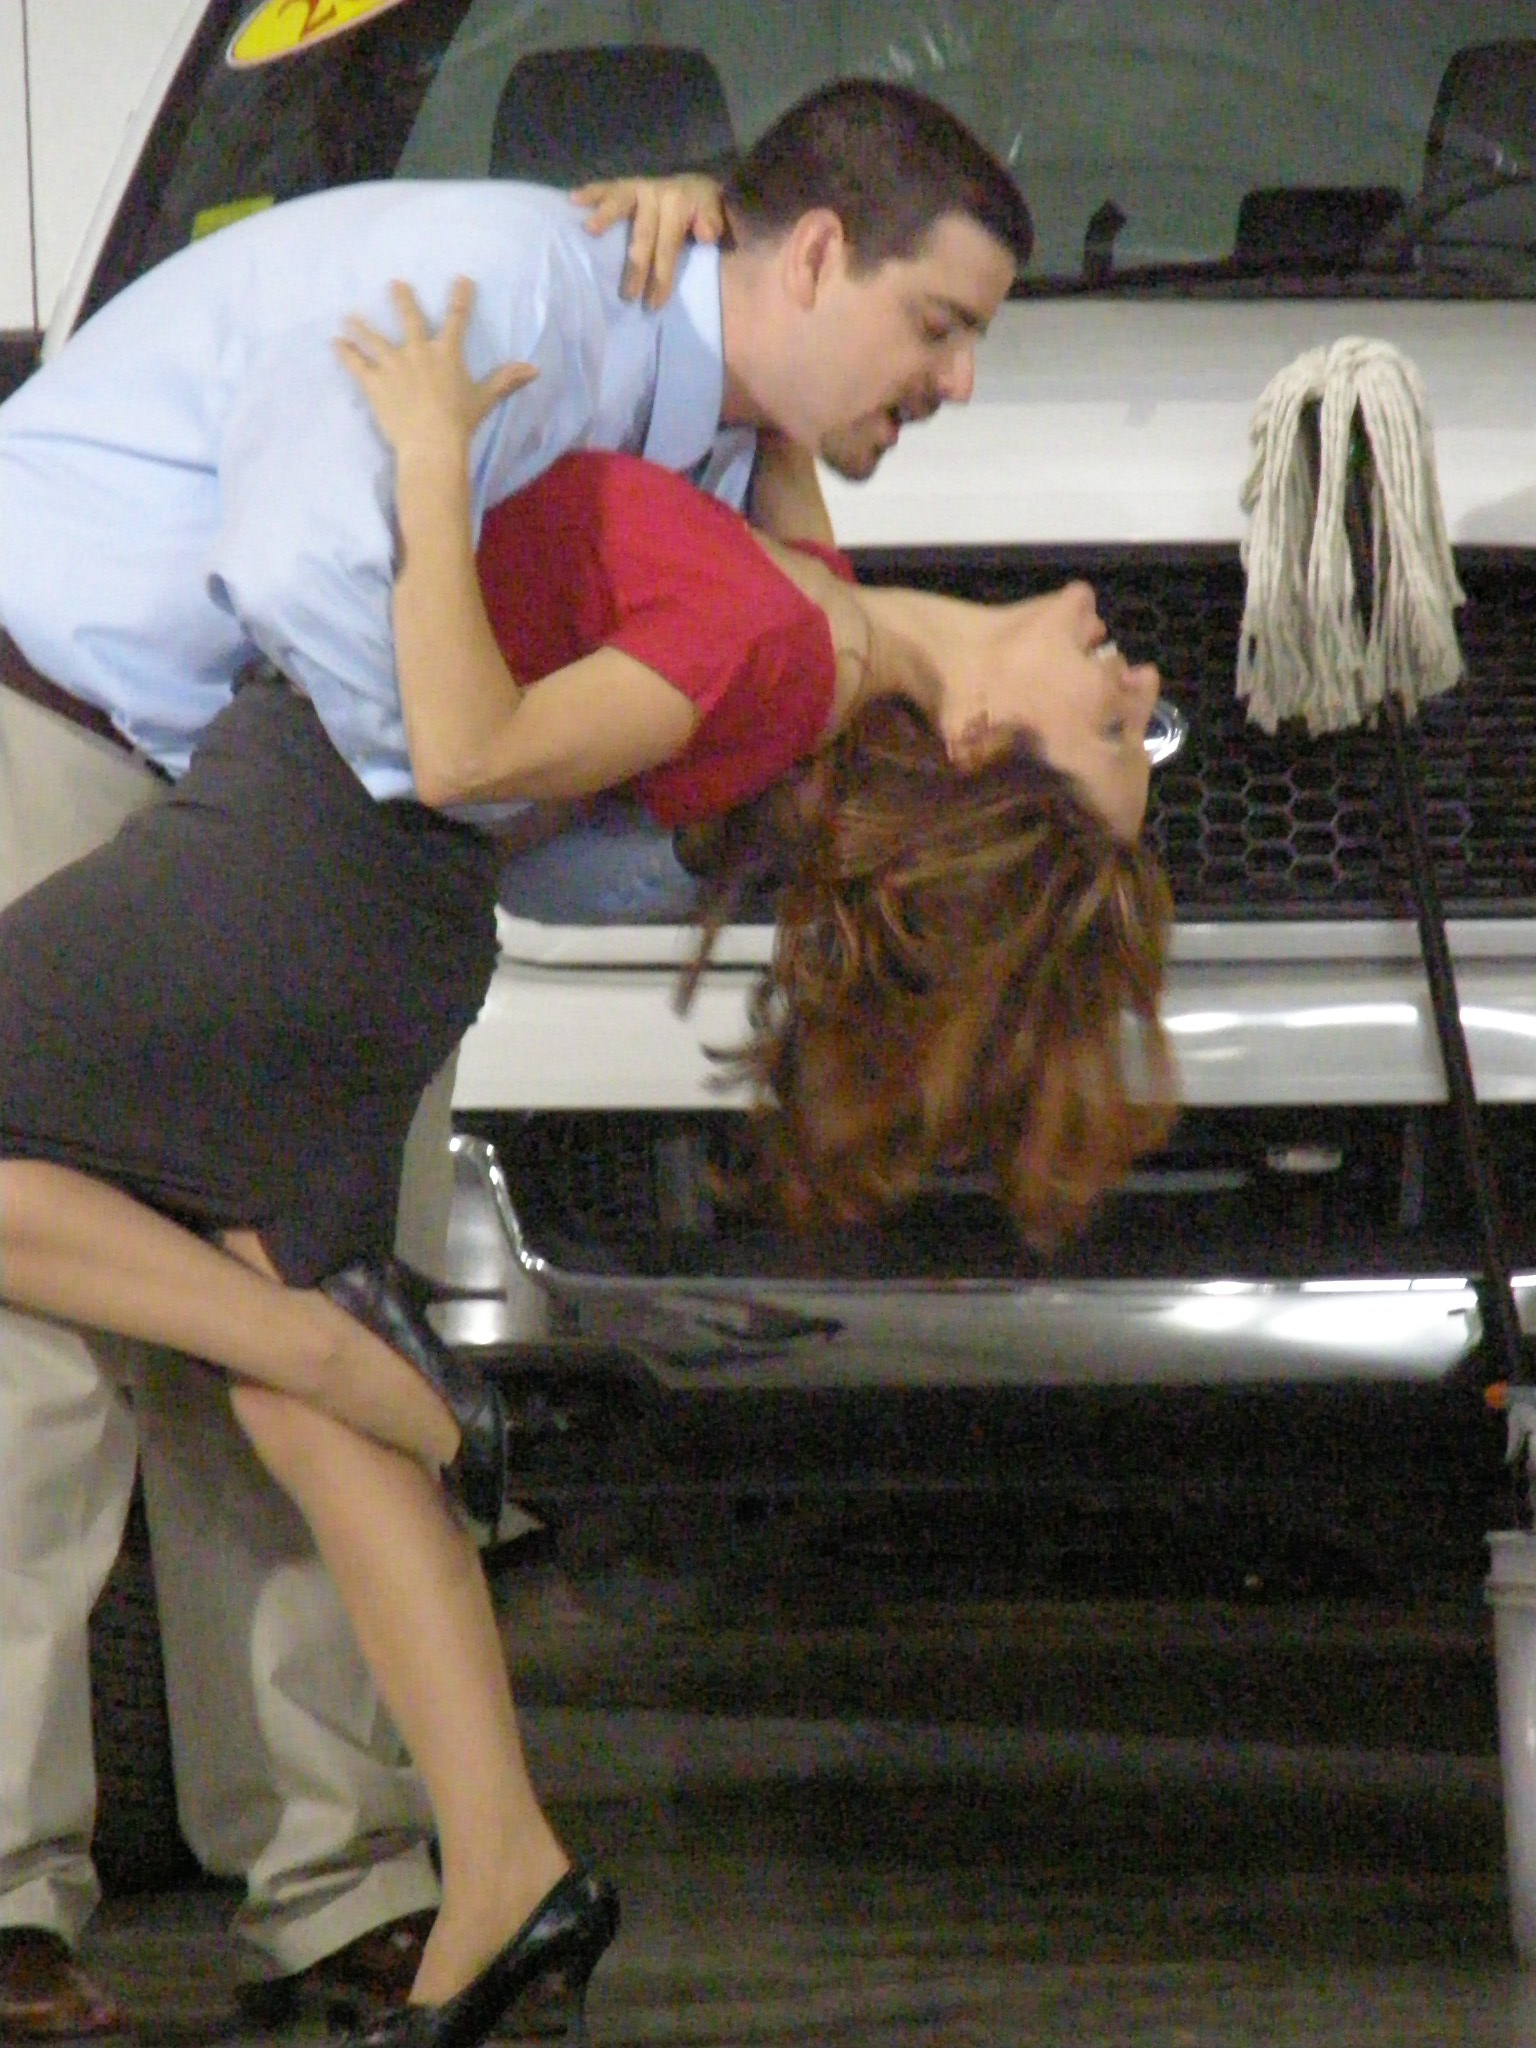 Christina Jo'Leigh and Christopher Mascarelli as Gina and Marty in 'Trade-In'